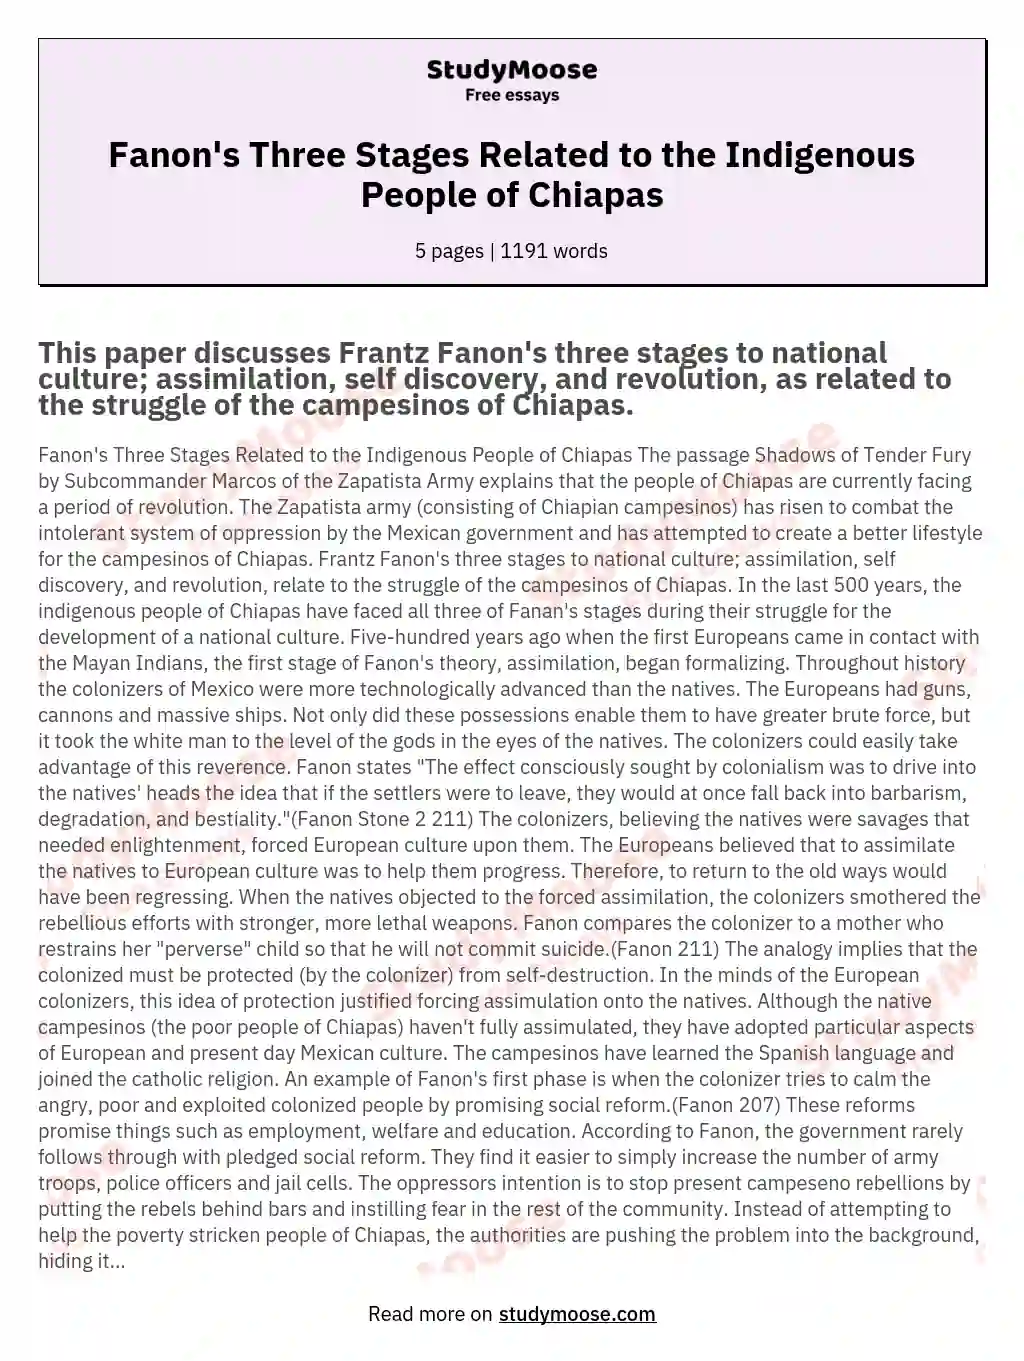 Fanon's Three Stages Related to the Indigenous People of Chiapas essay